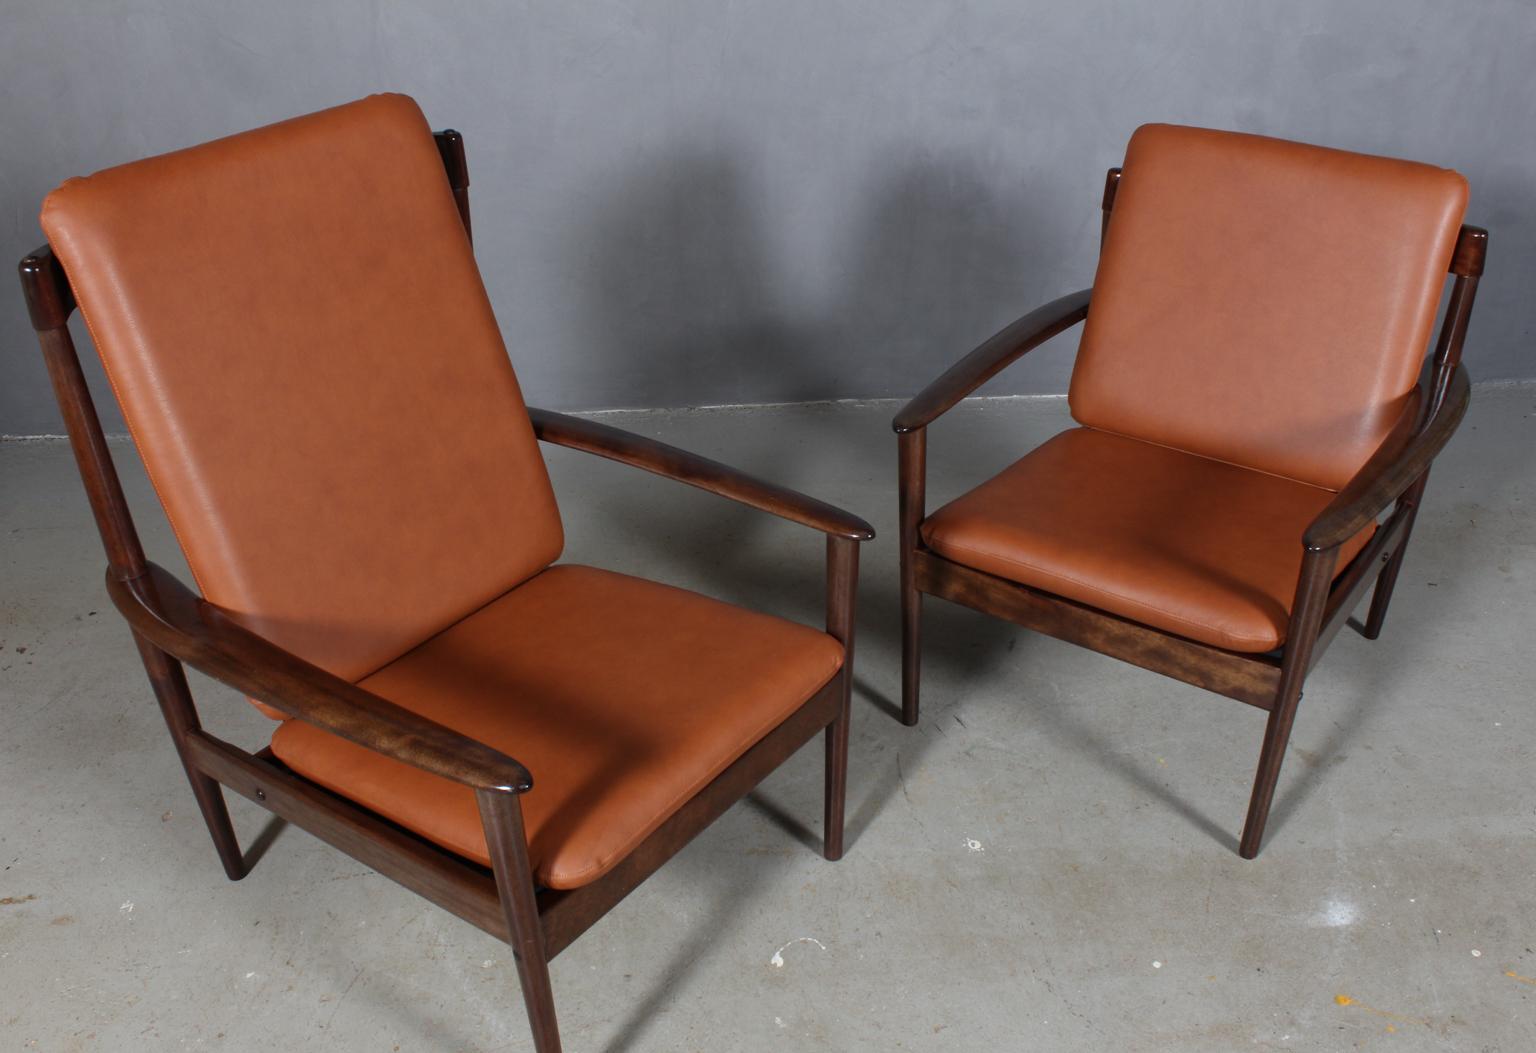 Pair of Grete Jalk armchairs in lacquered mahogany.

New upholstered cushions with tan pure aniline leather.

Model 56, made by Poul Jeppesen.